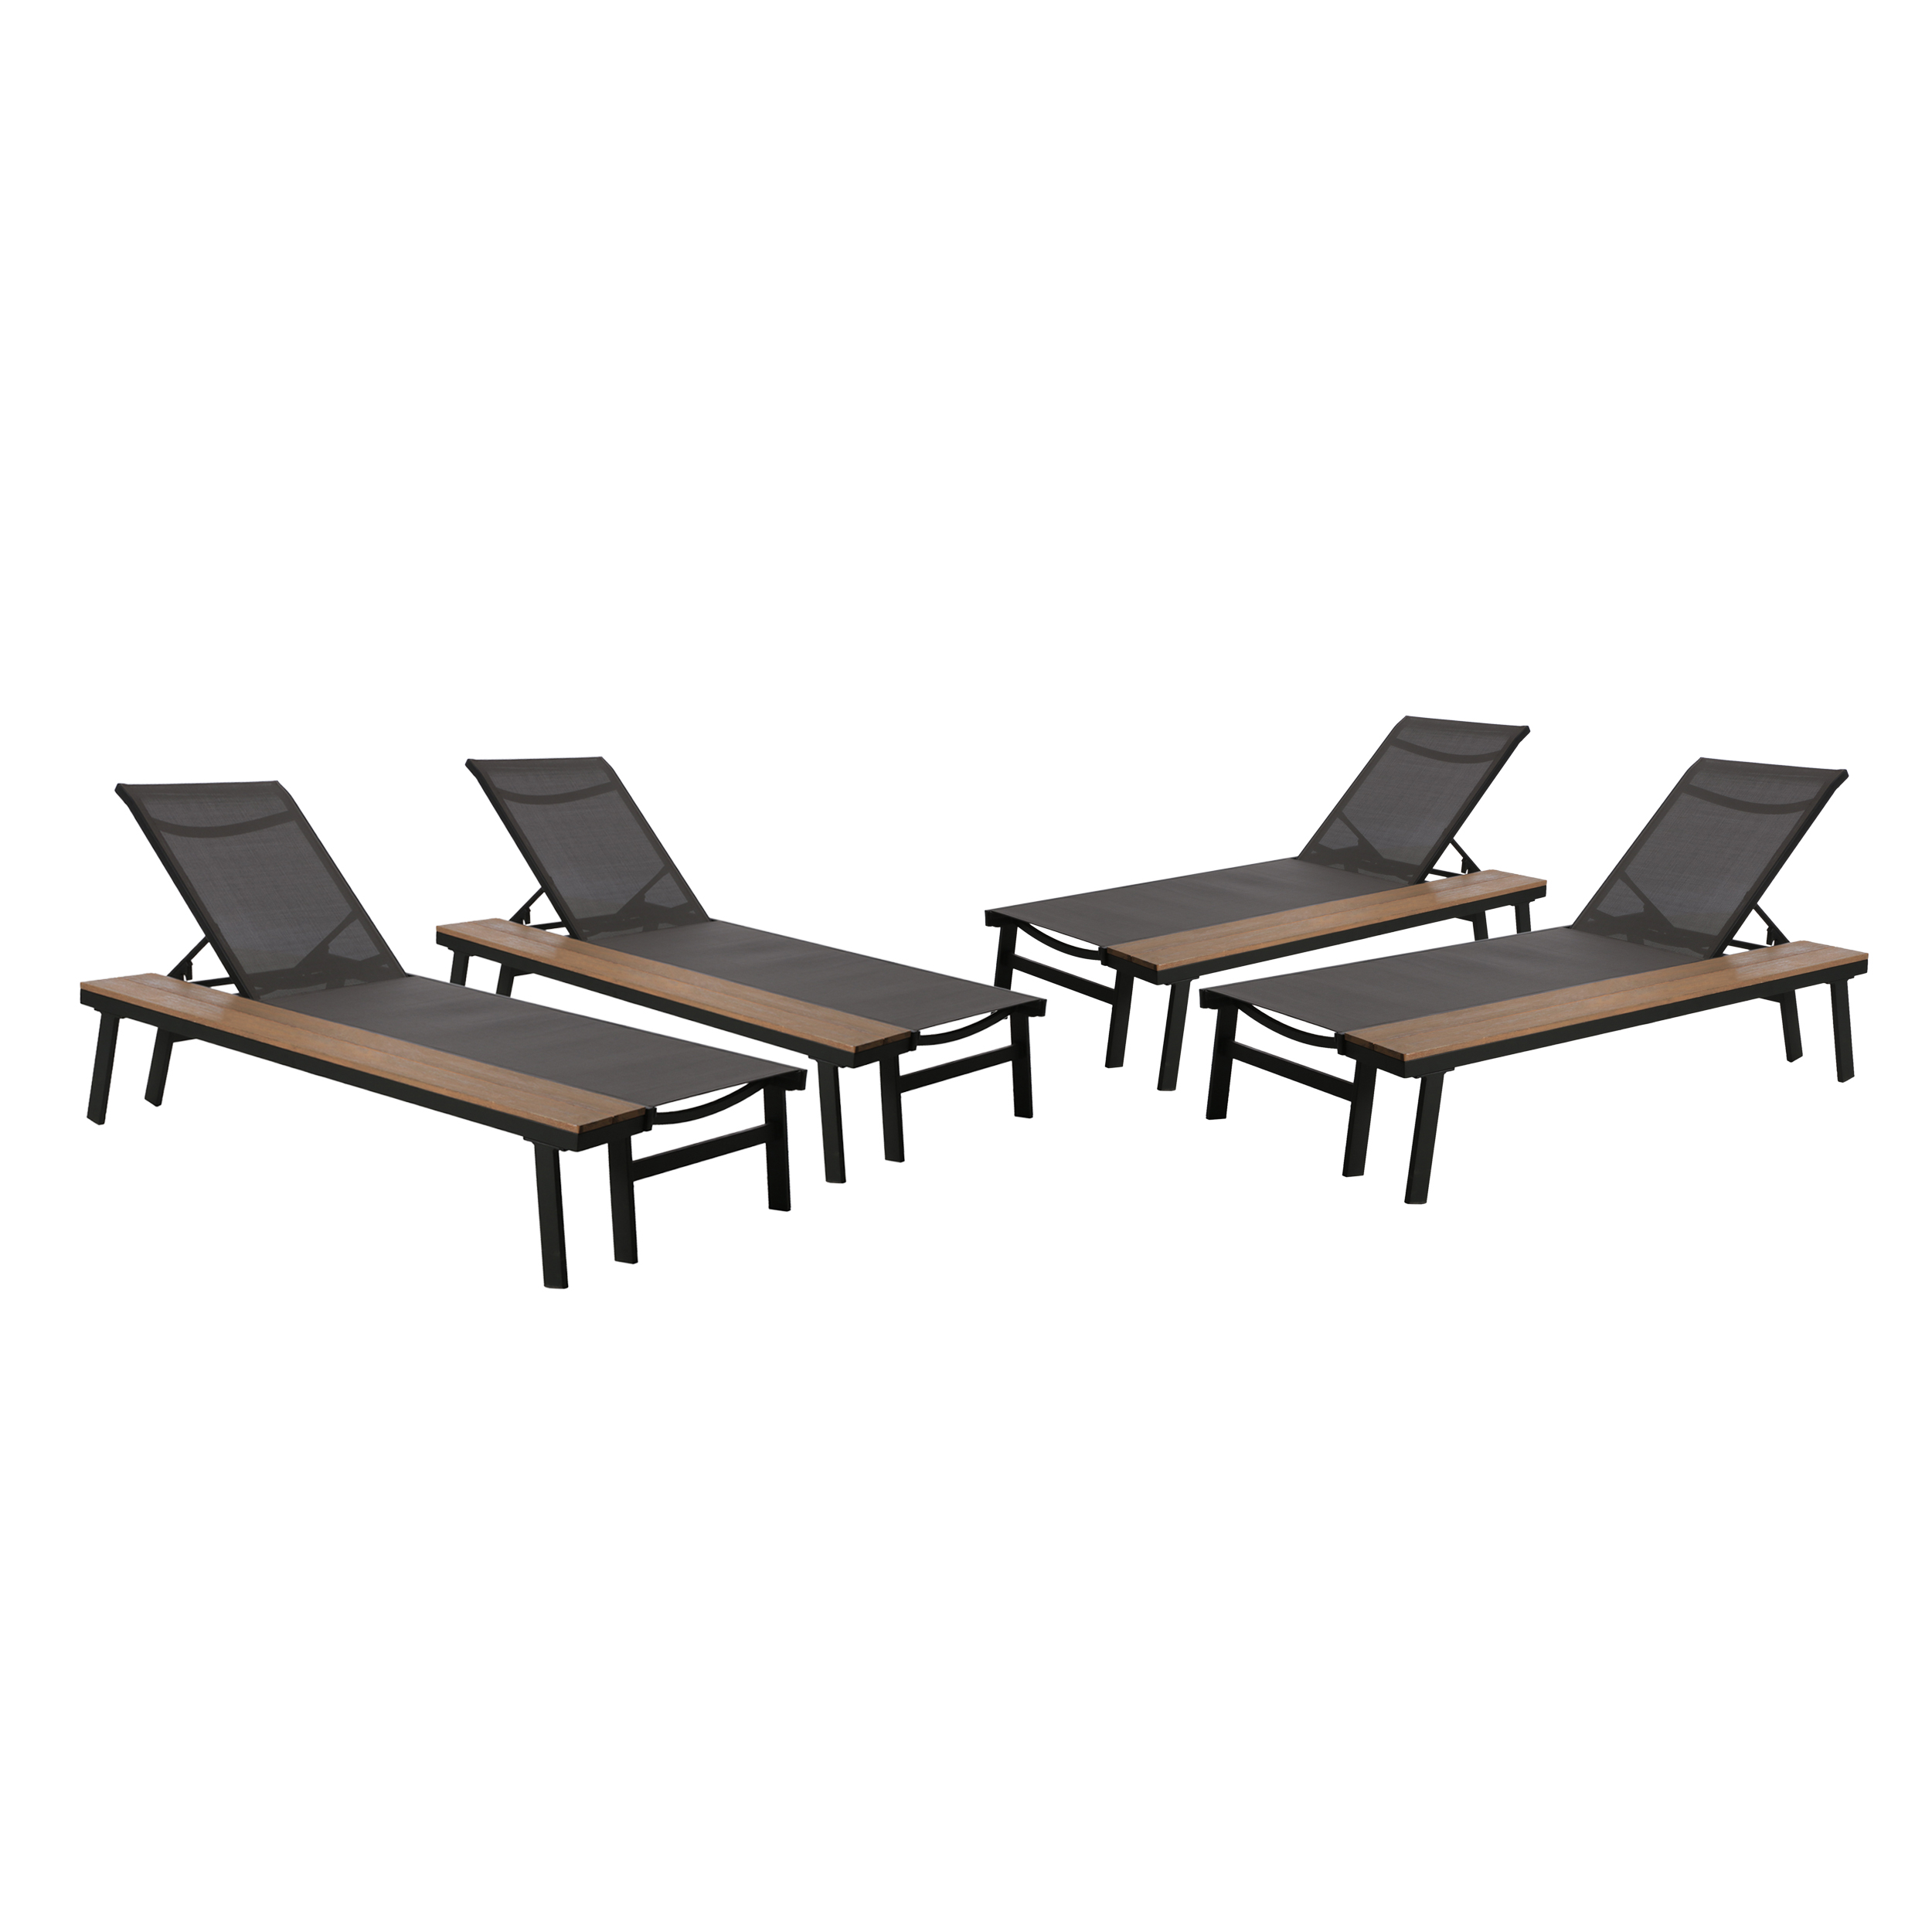 Killian Outdoor Mesh and Aluminum Chaise Lounge with Side Table, Set of 4, Gray - image 3 of 7